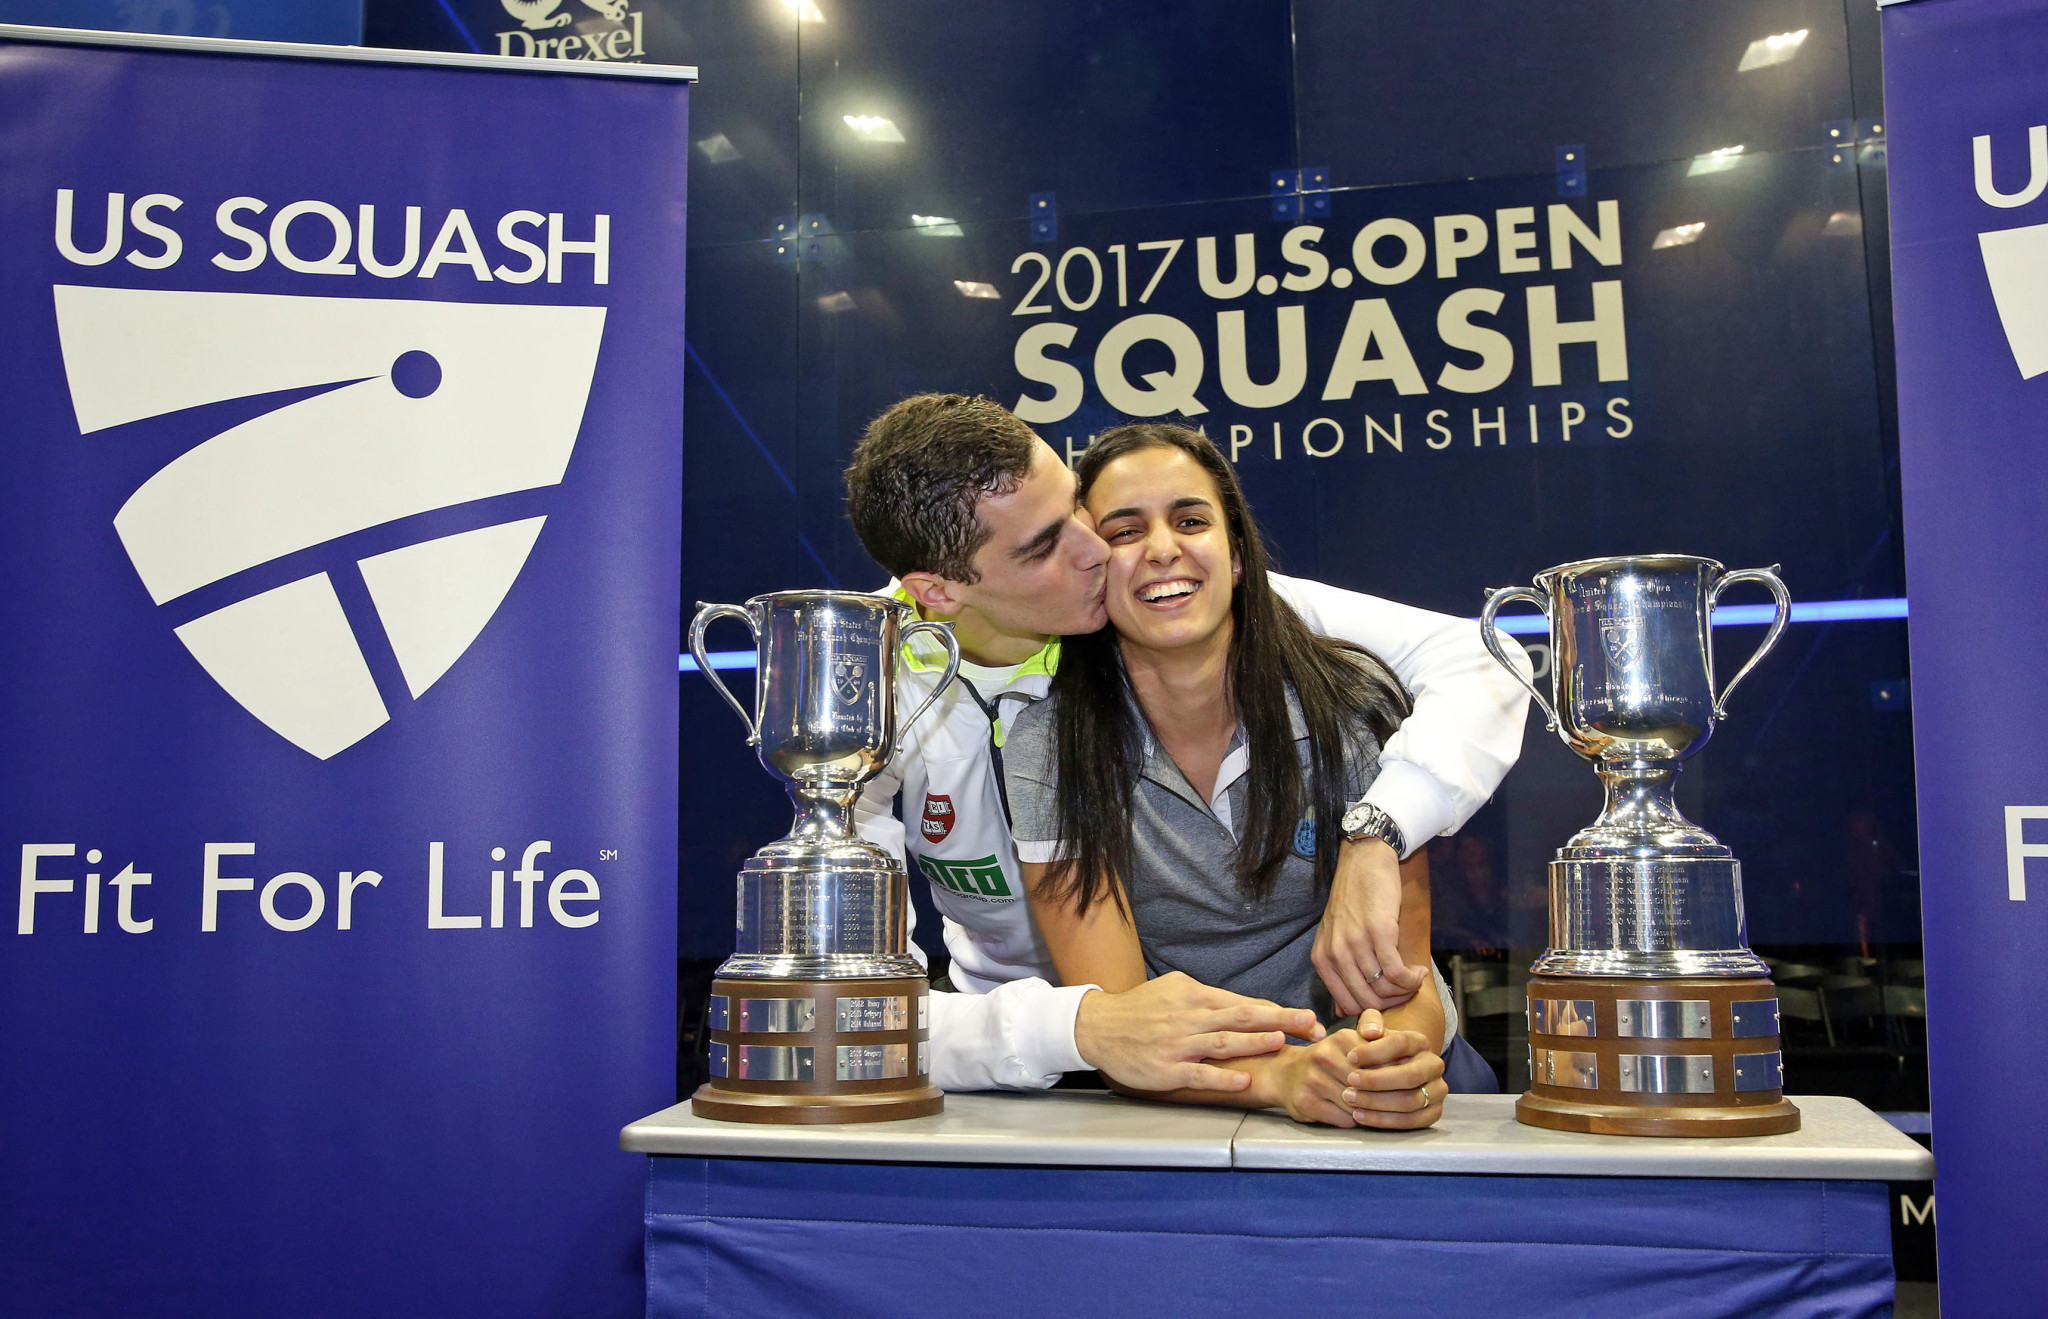 Egypt's Ali Farag and Nour El Tayeb both triumphed at the PSA US Open today to become the first married couple in sporting history to win the same major title on the same day ©PSA